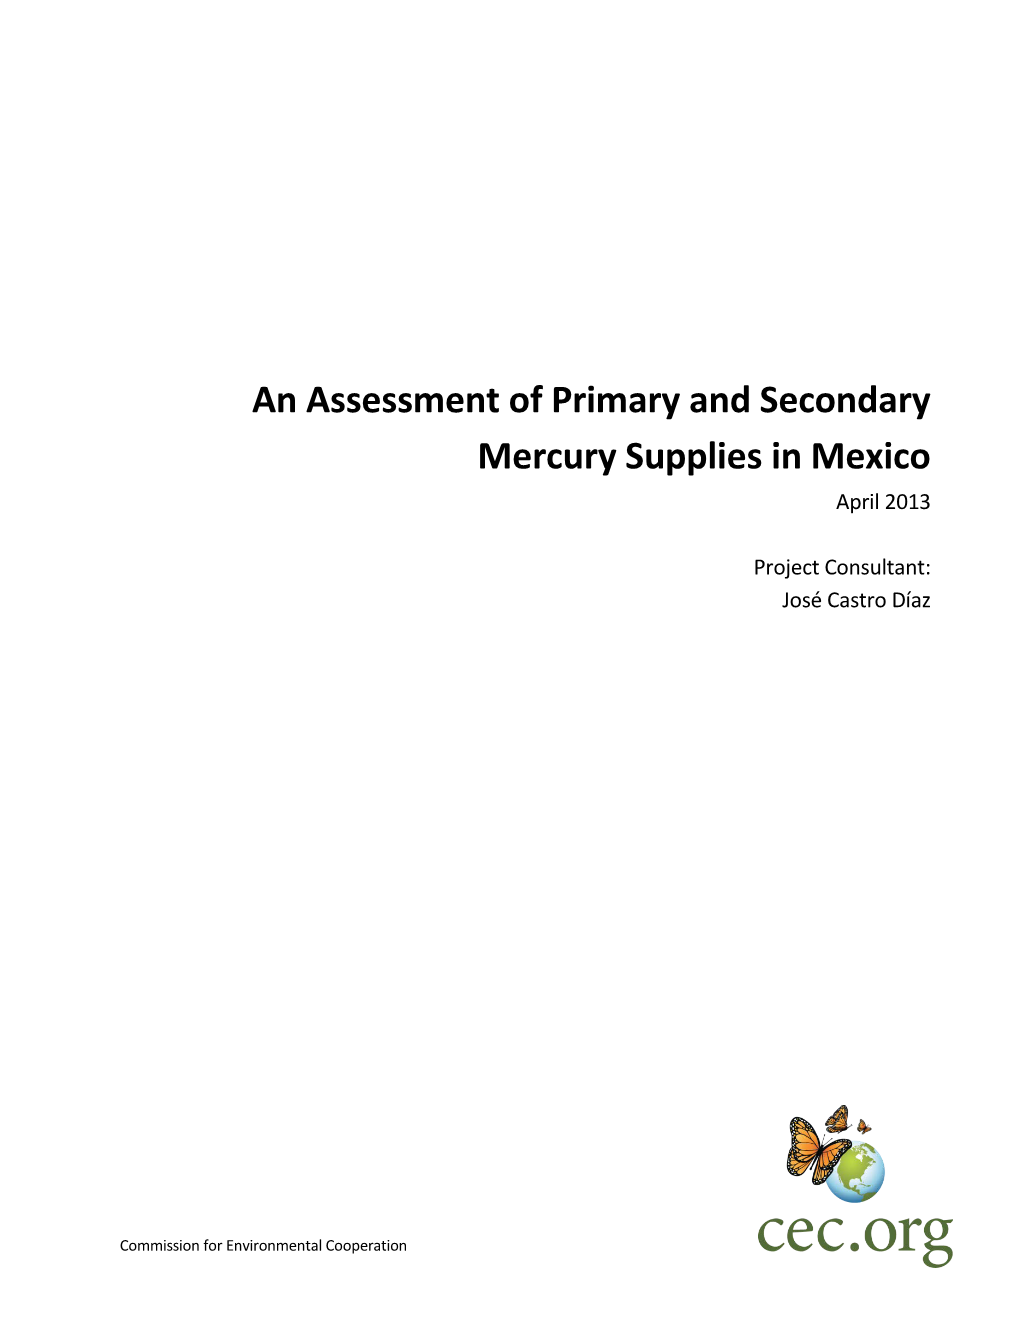 An Assessment of Primary and Secondary Mercury Supplies in Mexico April 2013